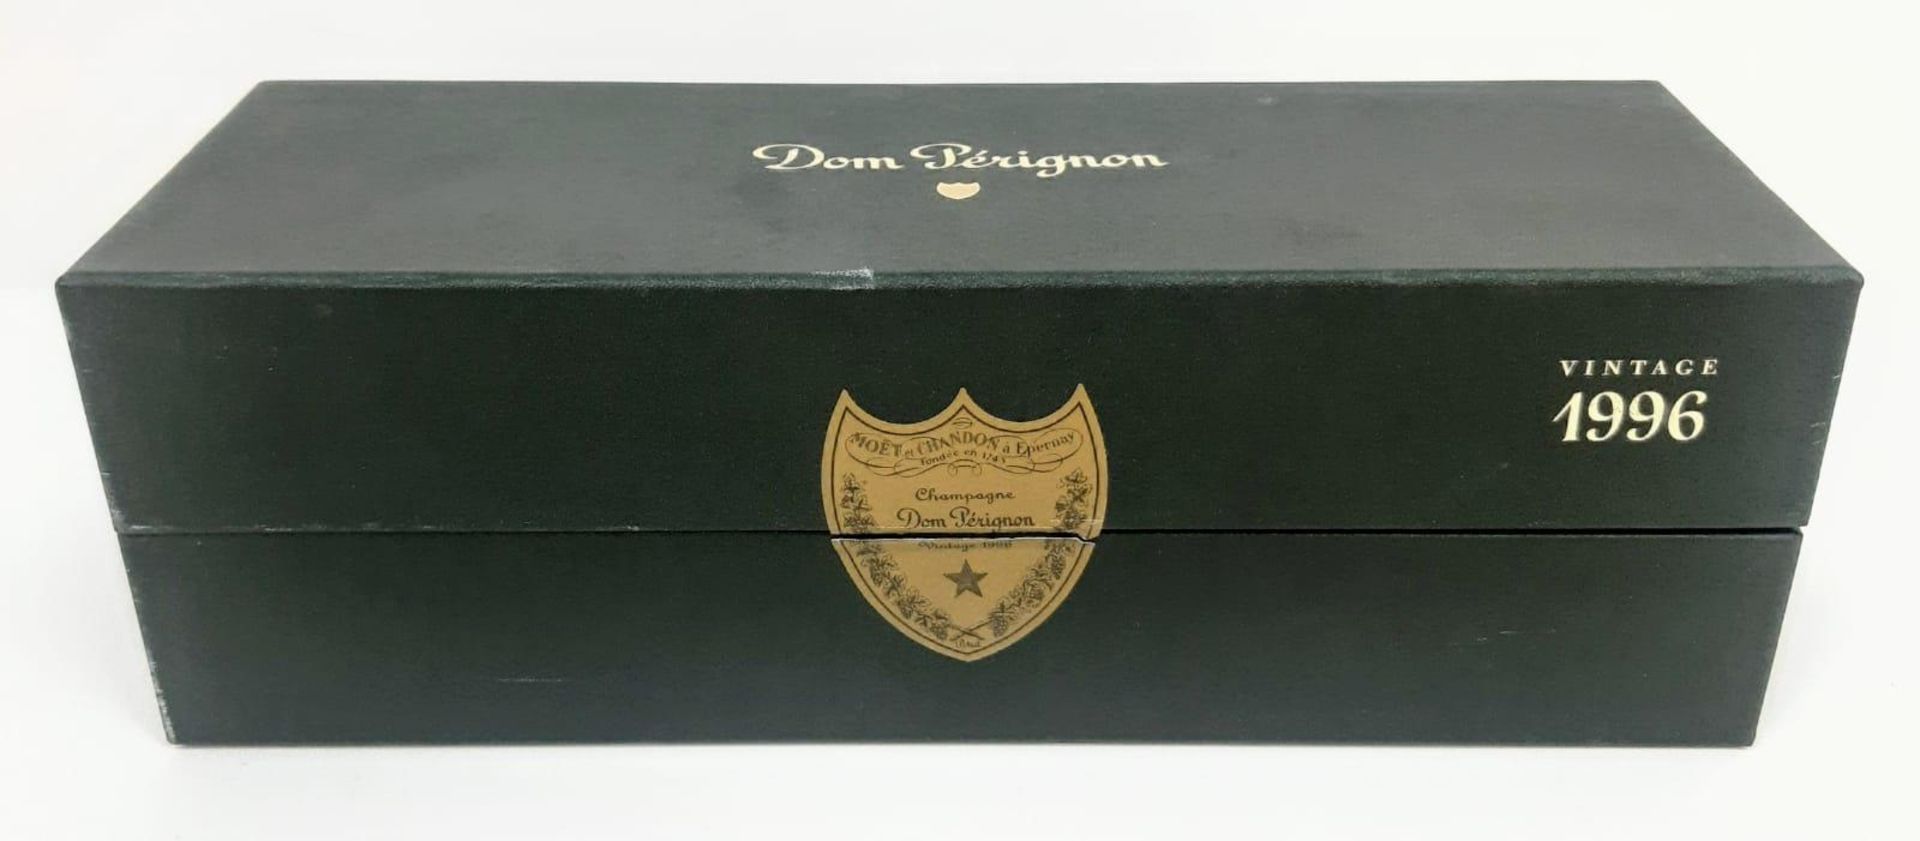 A Bottle (750ml) of Dom Perignon 1996 Vintage Champagne. 1996 was one of the finest vintages from - Image 3 of 5